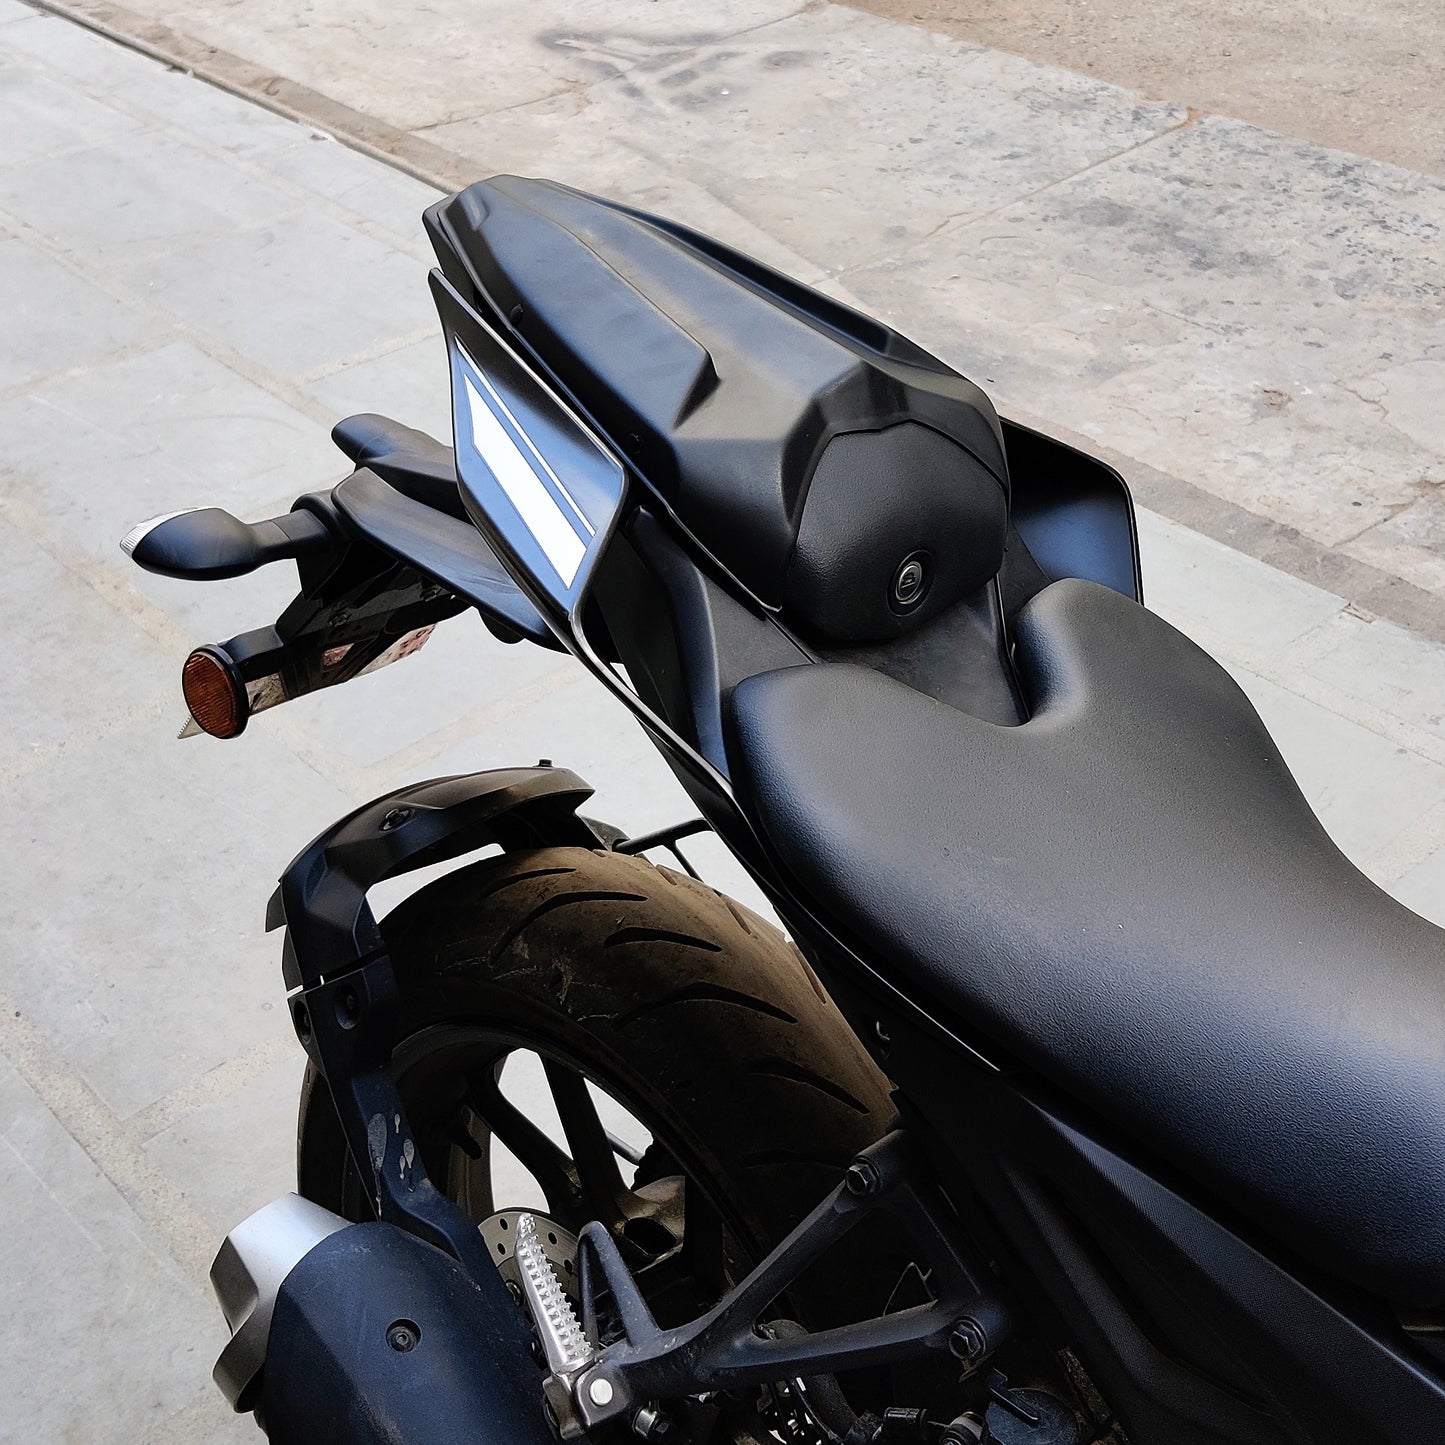 Yamaha R15 V4 Accessories | Modified R15v4 | Best R15 Modification | Saiga Parts Seat Cowl for R15v4